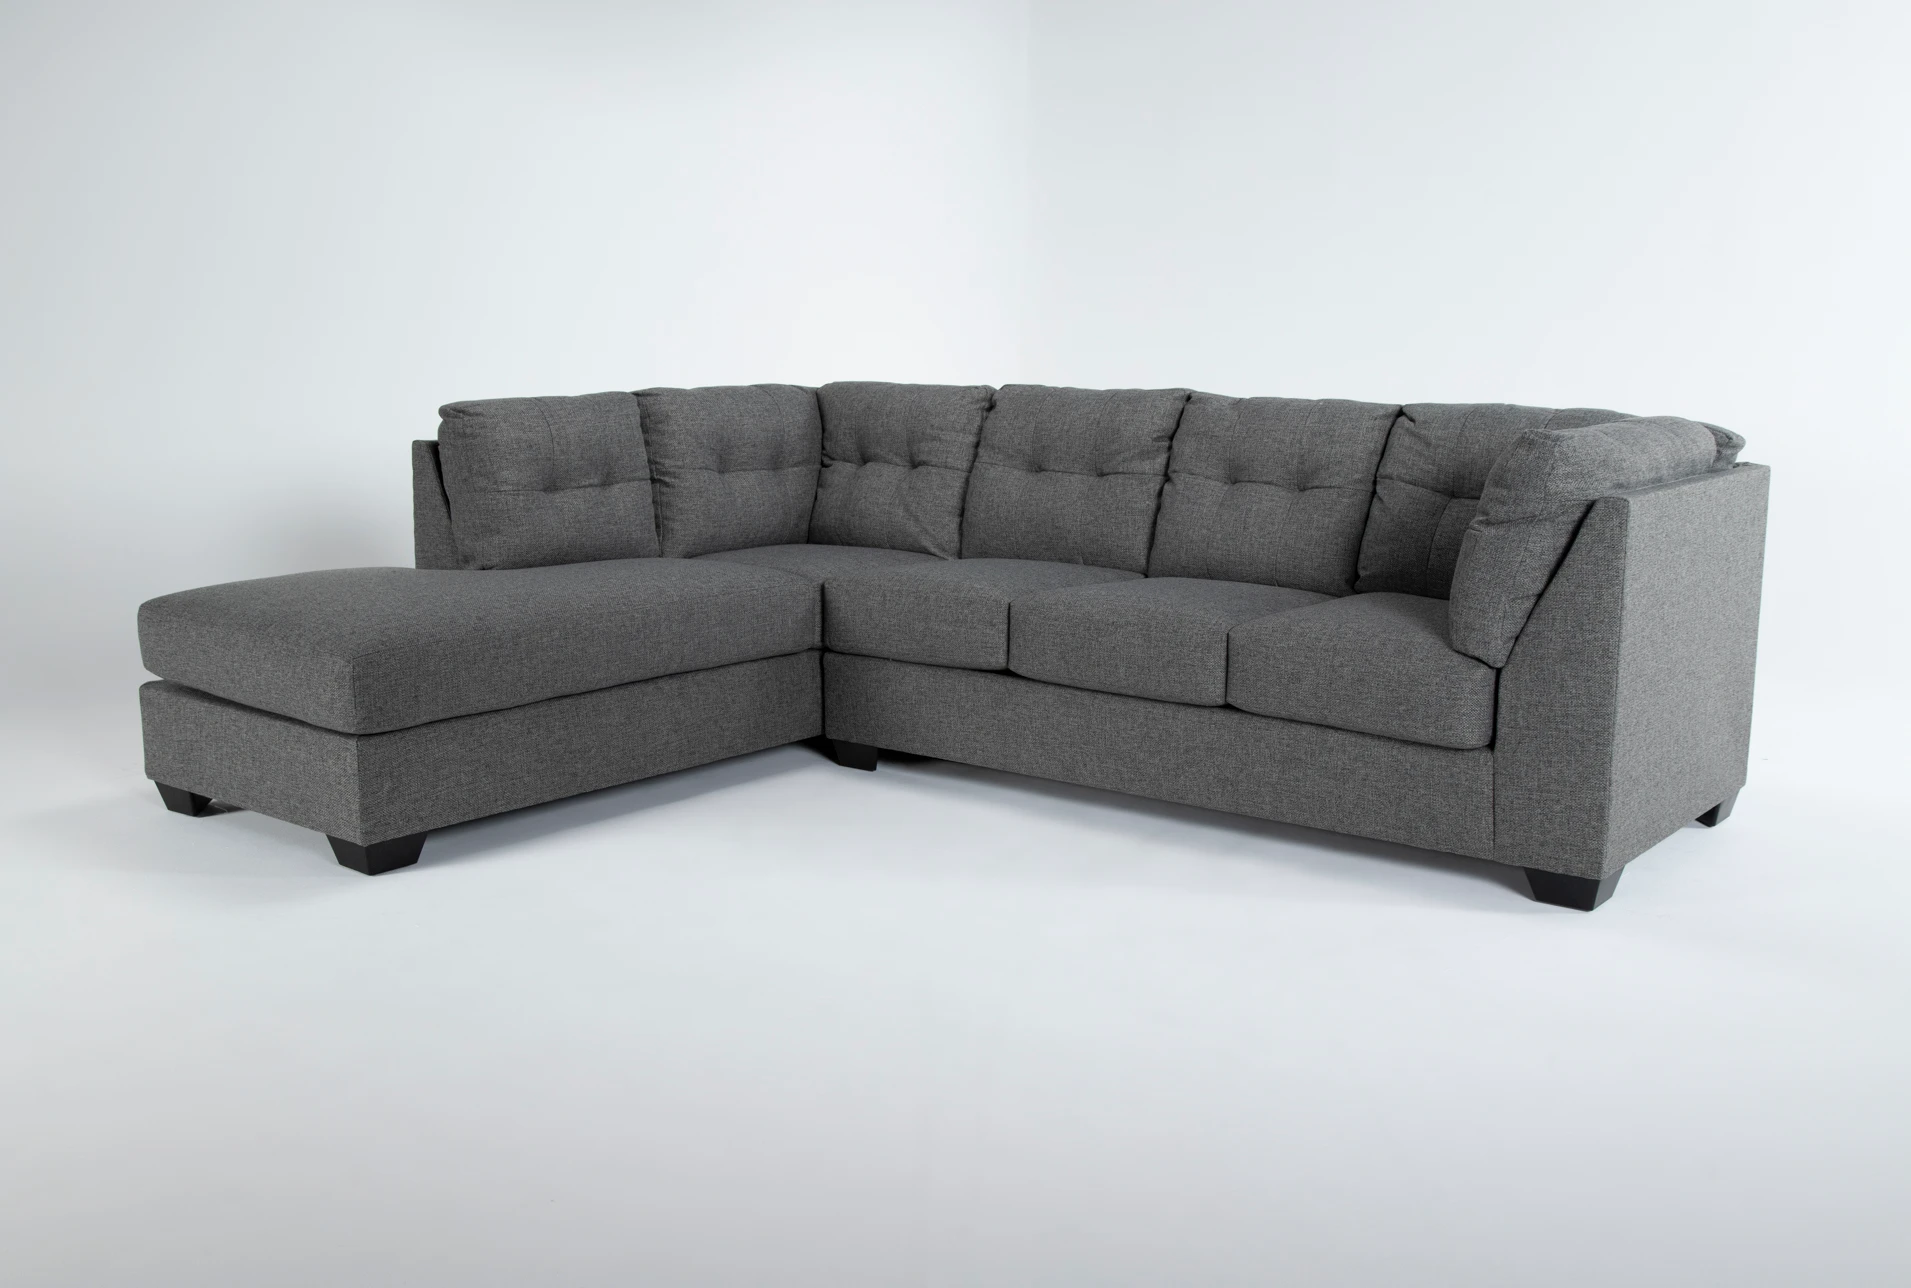 Sleeper Left Arm Facing Chaise, 2 Piece Sectional Sleeper Sofa With Storage